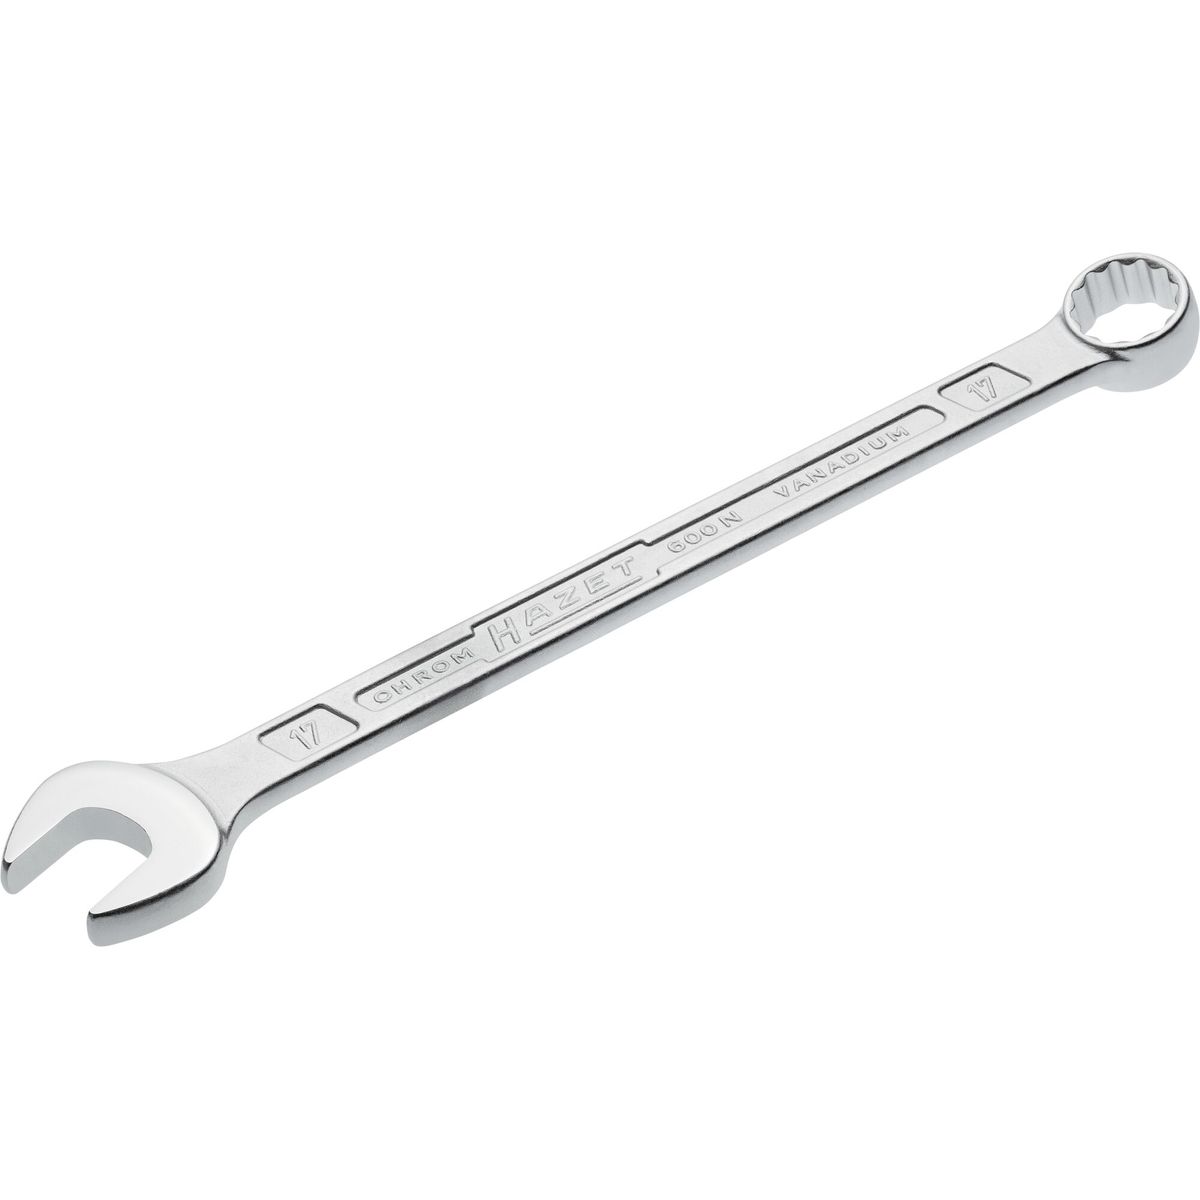 Combination Wrench No.600N-17 Hazet®